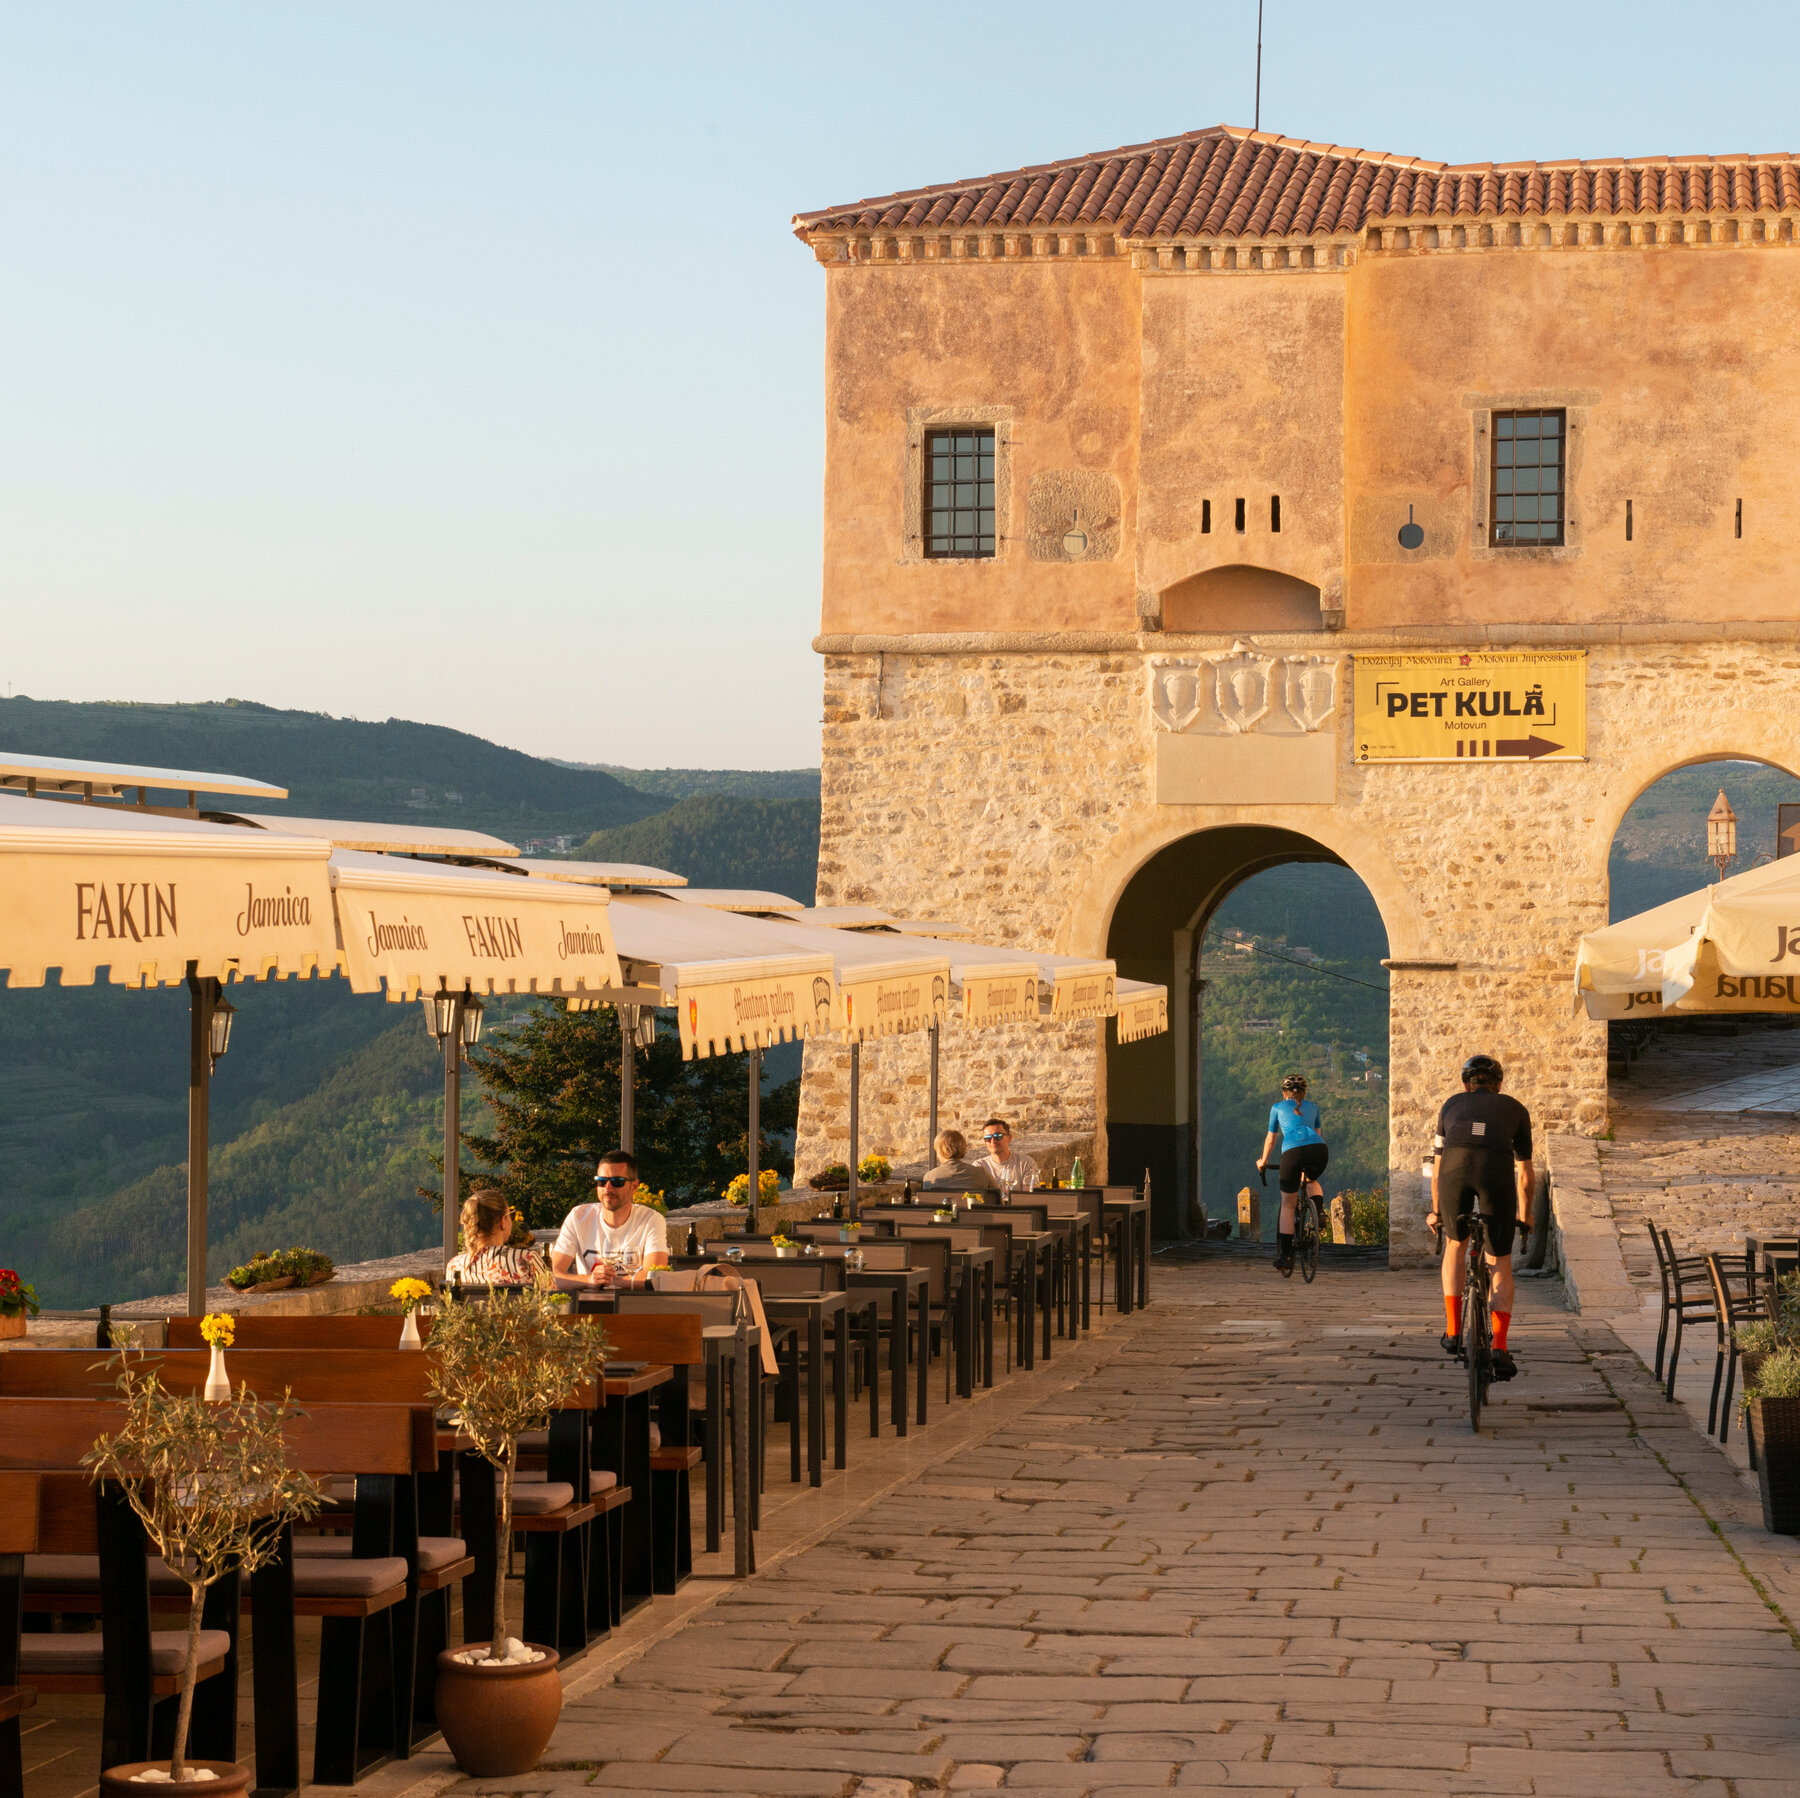 Two people ride their bicycles through a path near a restaurant on top of a mountain.